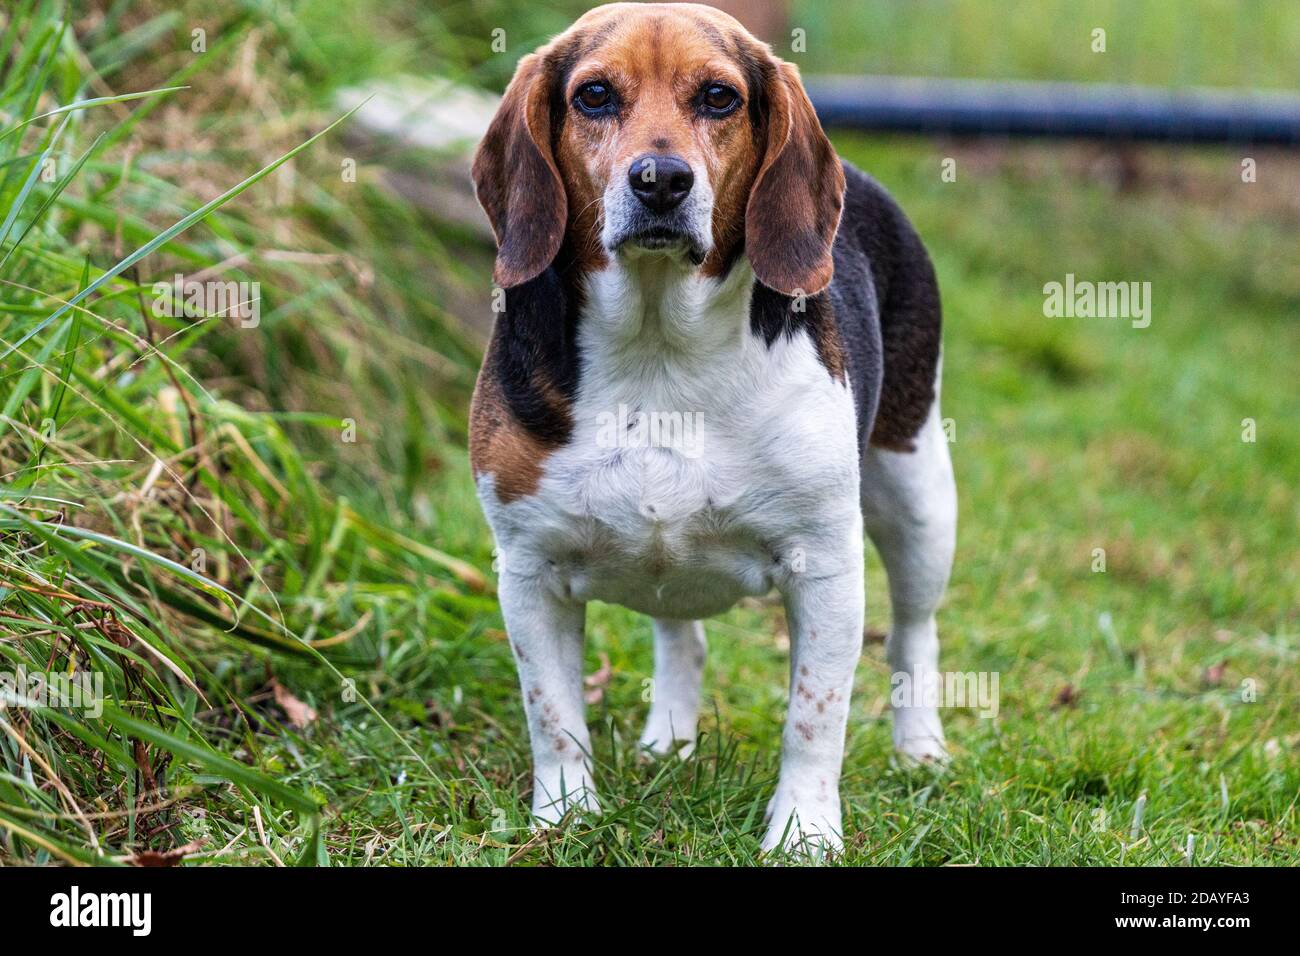 A Tri-color English beagle (Canis lupus familiaris) stares reproachfully at the camera Stock Photo